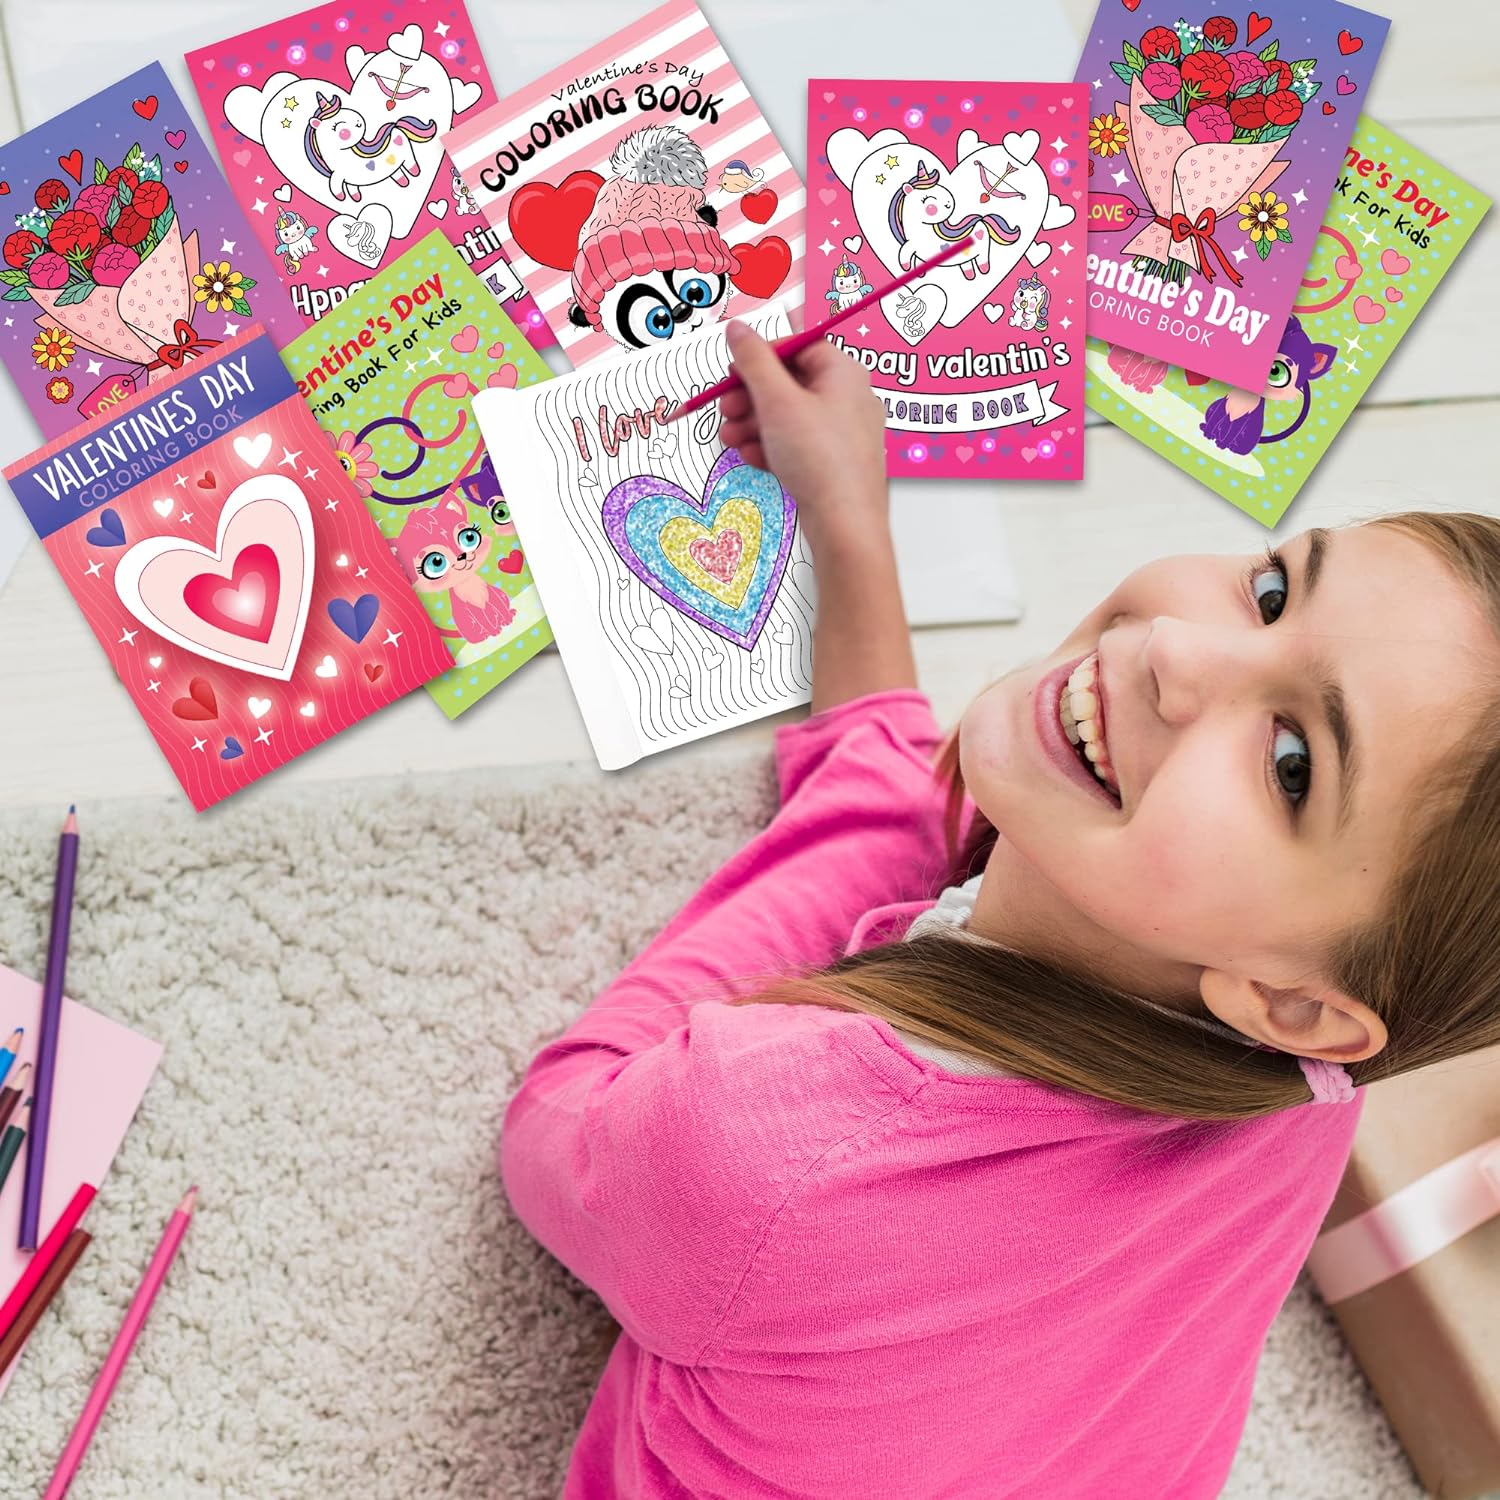 Valentines Day Coloring Books for Kids Bulk, Pack of 20, Small Color Booklets in 5 Designs, Valentine Party Favors For Kids, Educational Valentine Gifts For Kids Classroom, Valentine Treats For Kids